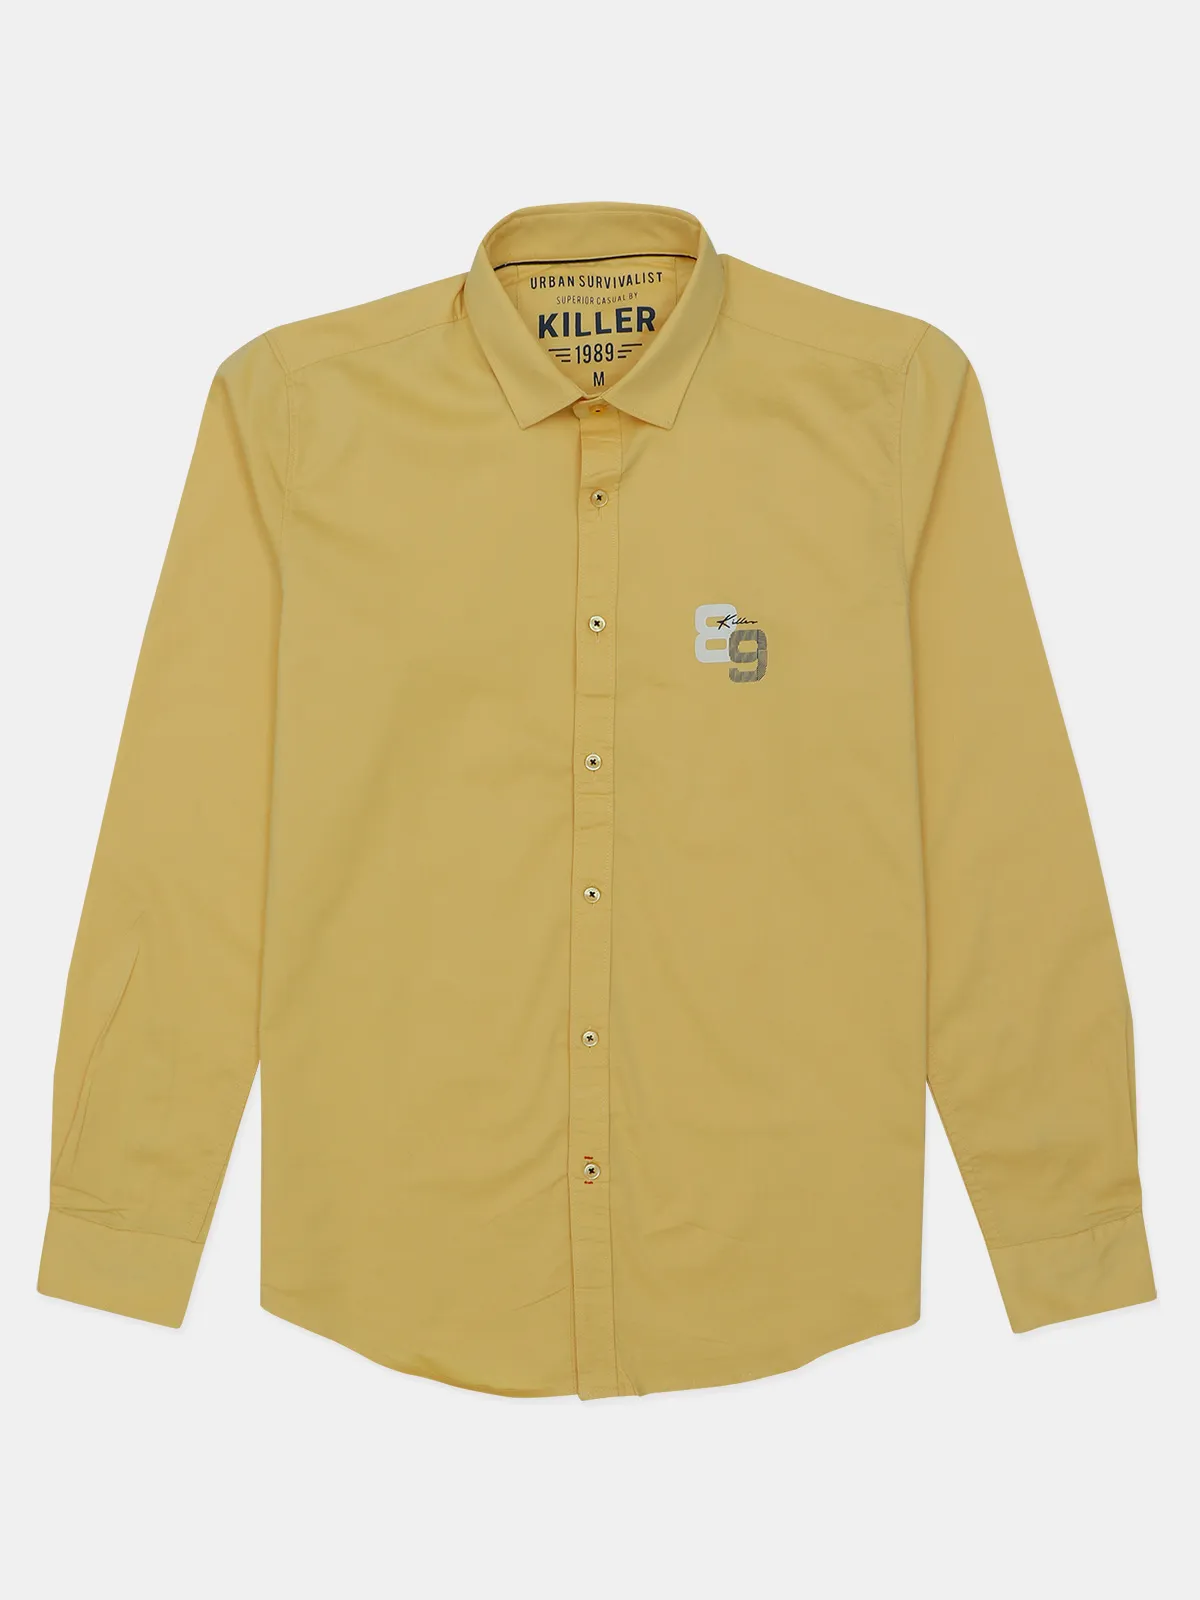 Killer printed yellow casual shirt in cotton